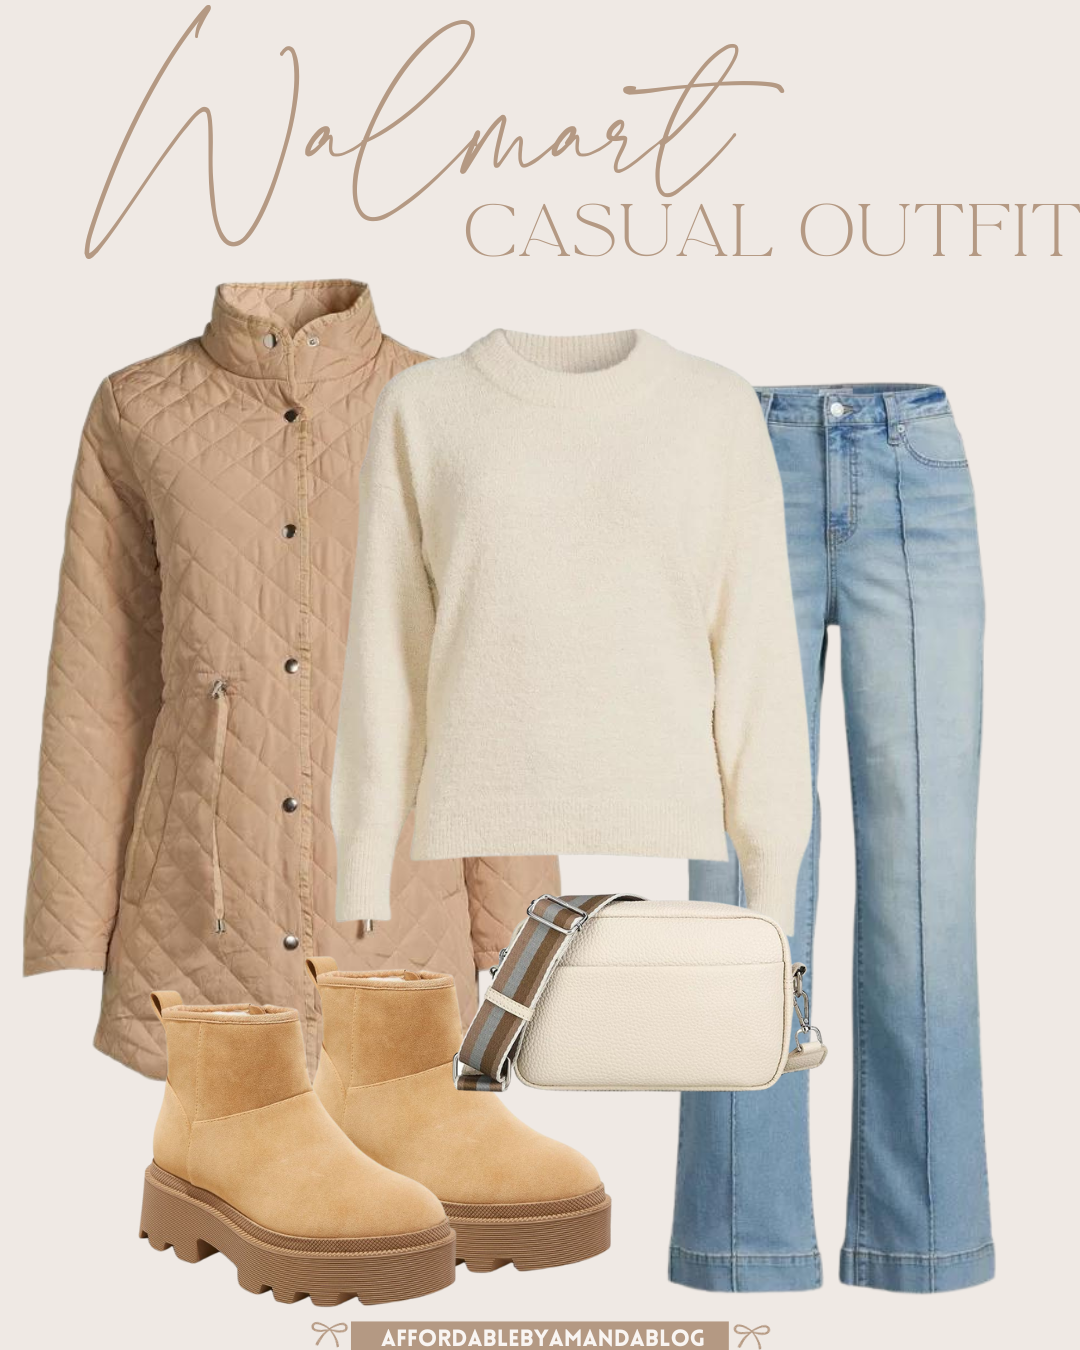 Walmart Winter Outfit Idea - Affordable by Amanda